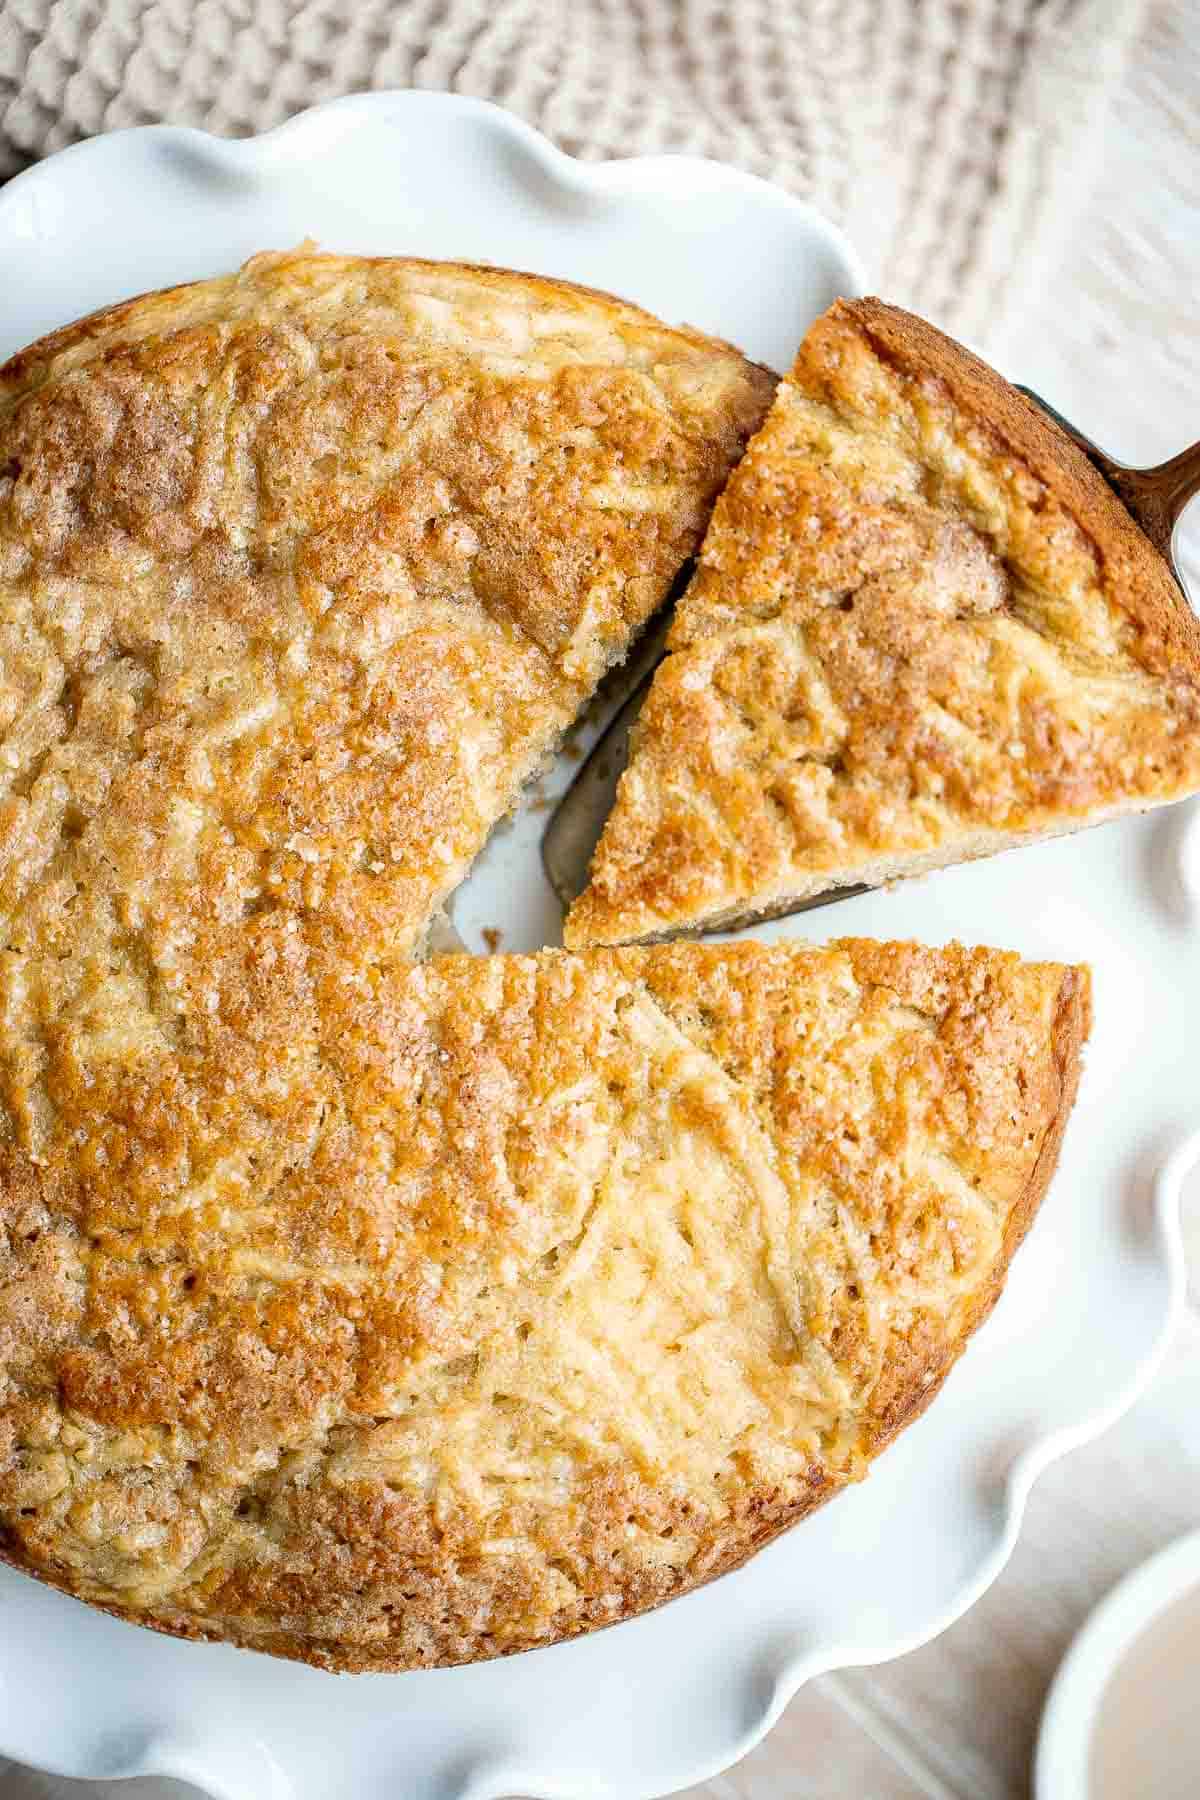 Easy Apple Cake has a dense and moist crumb and is loaded with fresh apples, cinnamon sugar, and nuts. It’s quick, easy, and ready to eat in under an hour. | aheadofthyme.com